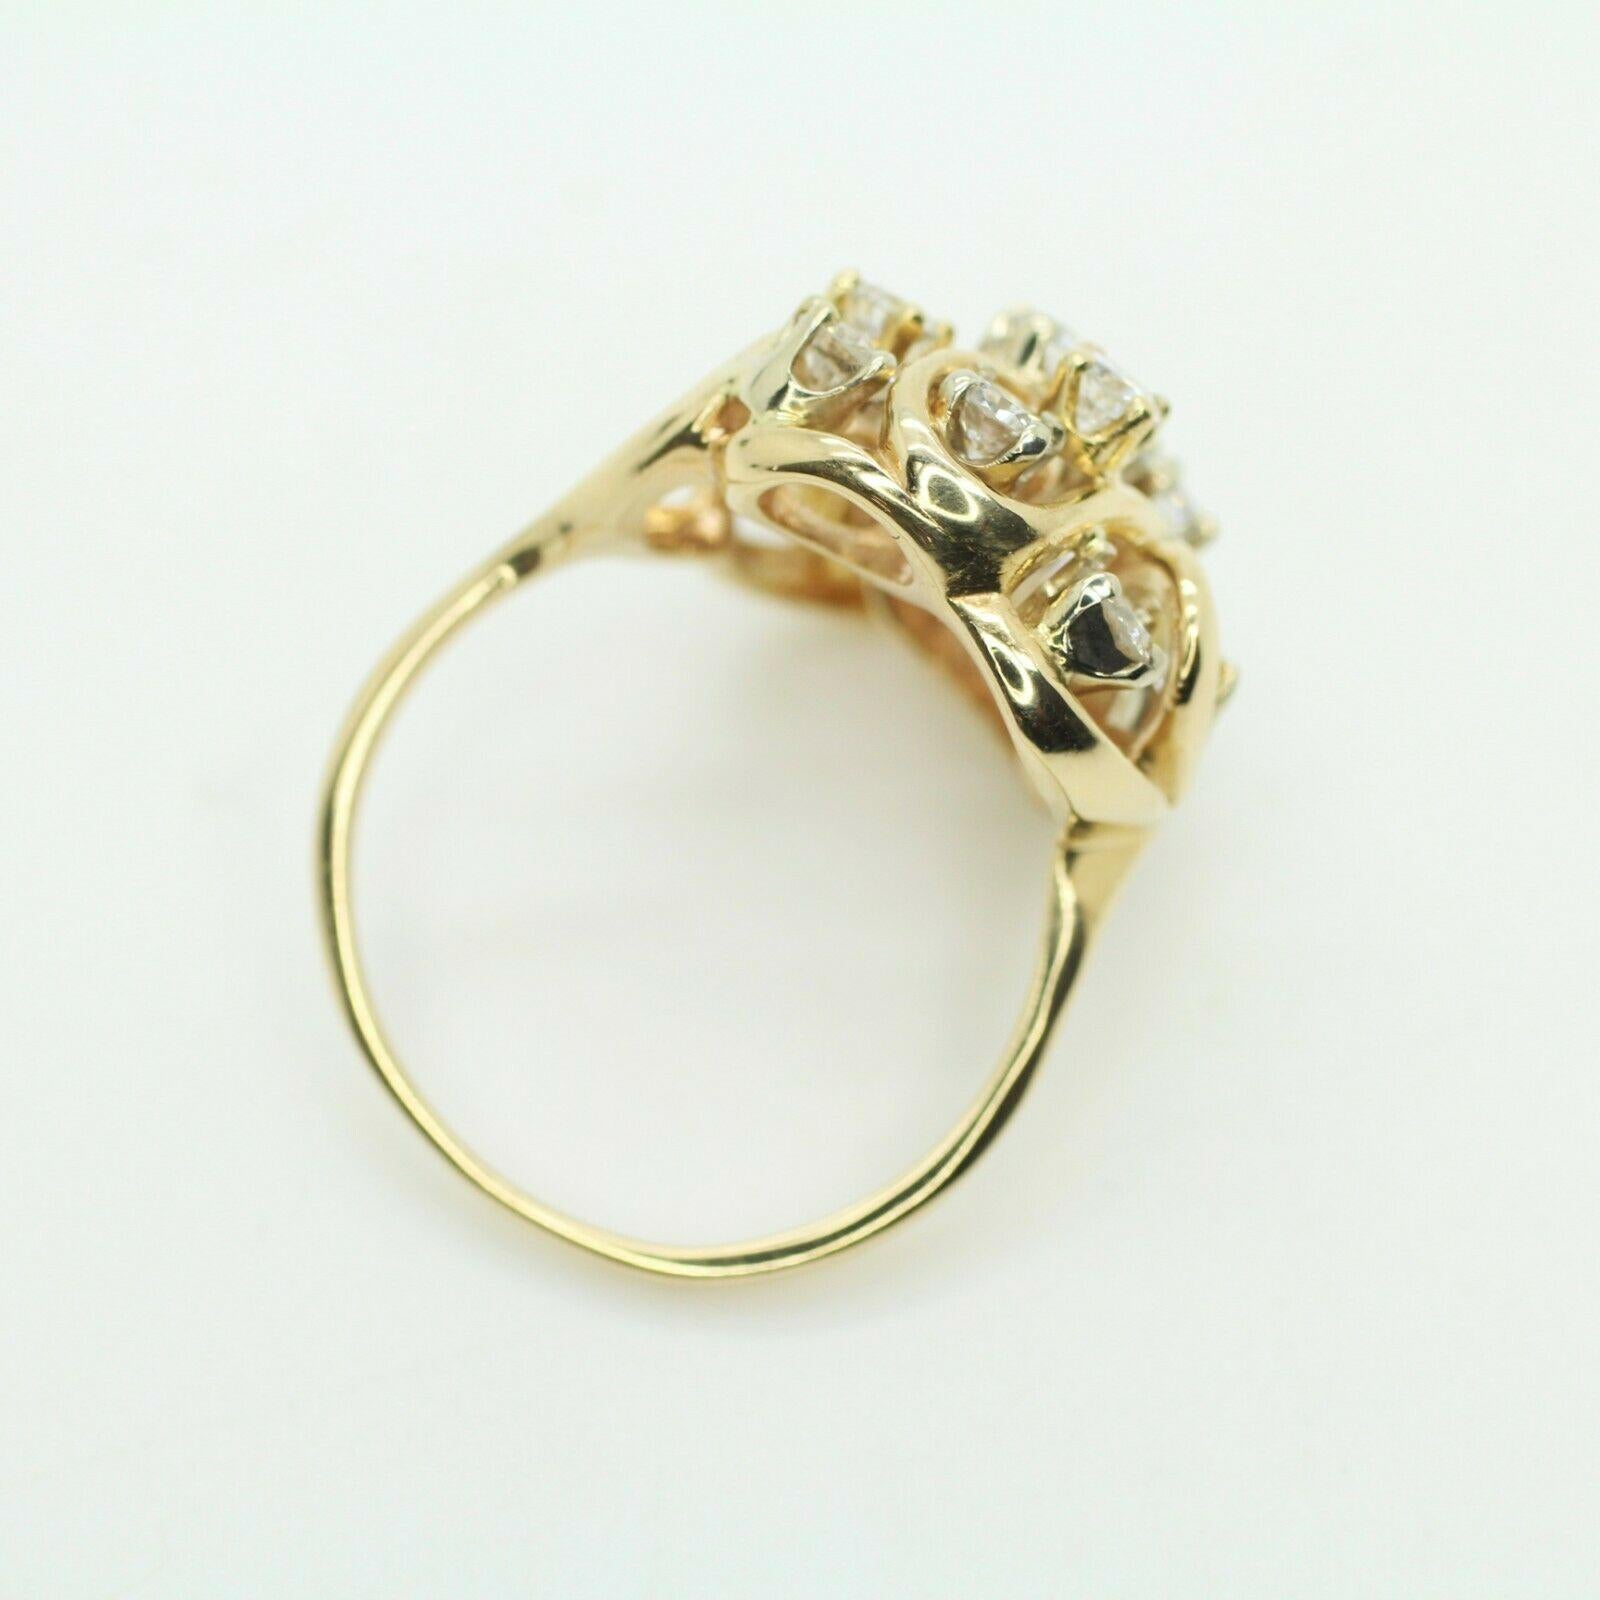 Yellow gold cocktail ring unlike other! This oval ring is decorated with 12 sparkling round cut SI1-SI2 diamonds. If you prefer it in white gold, please let us know.
Specifications:
    main stone:DIAMOND
    SIDE STONES:11 PCS ROUND CUT DIAMONDS 
 